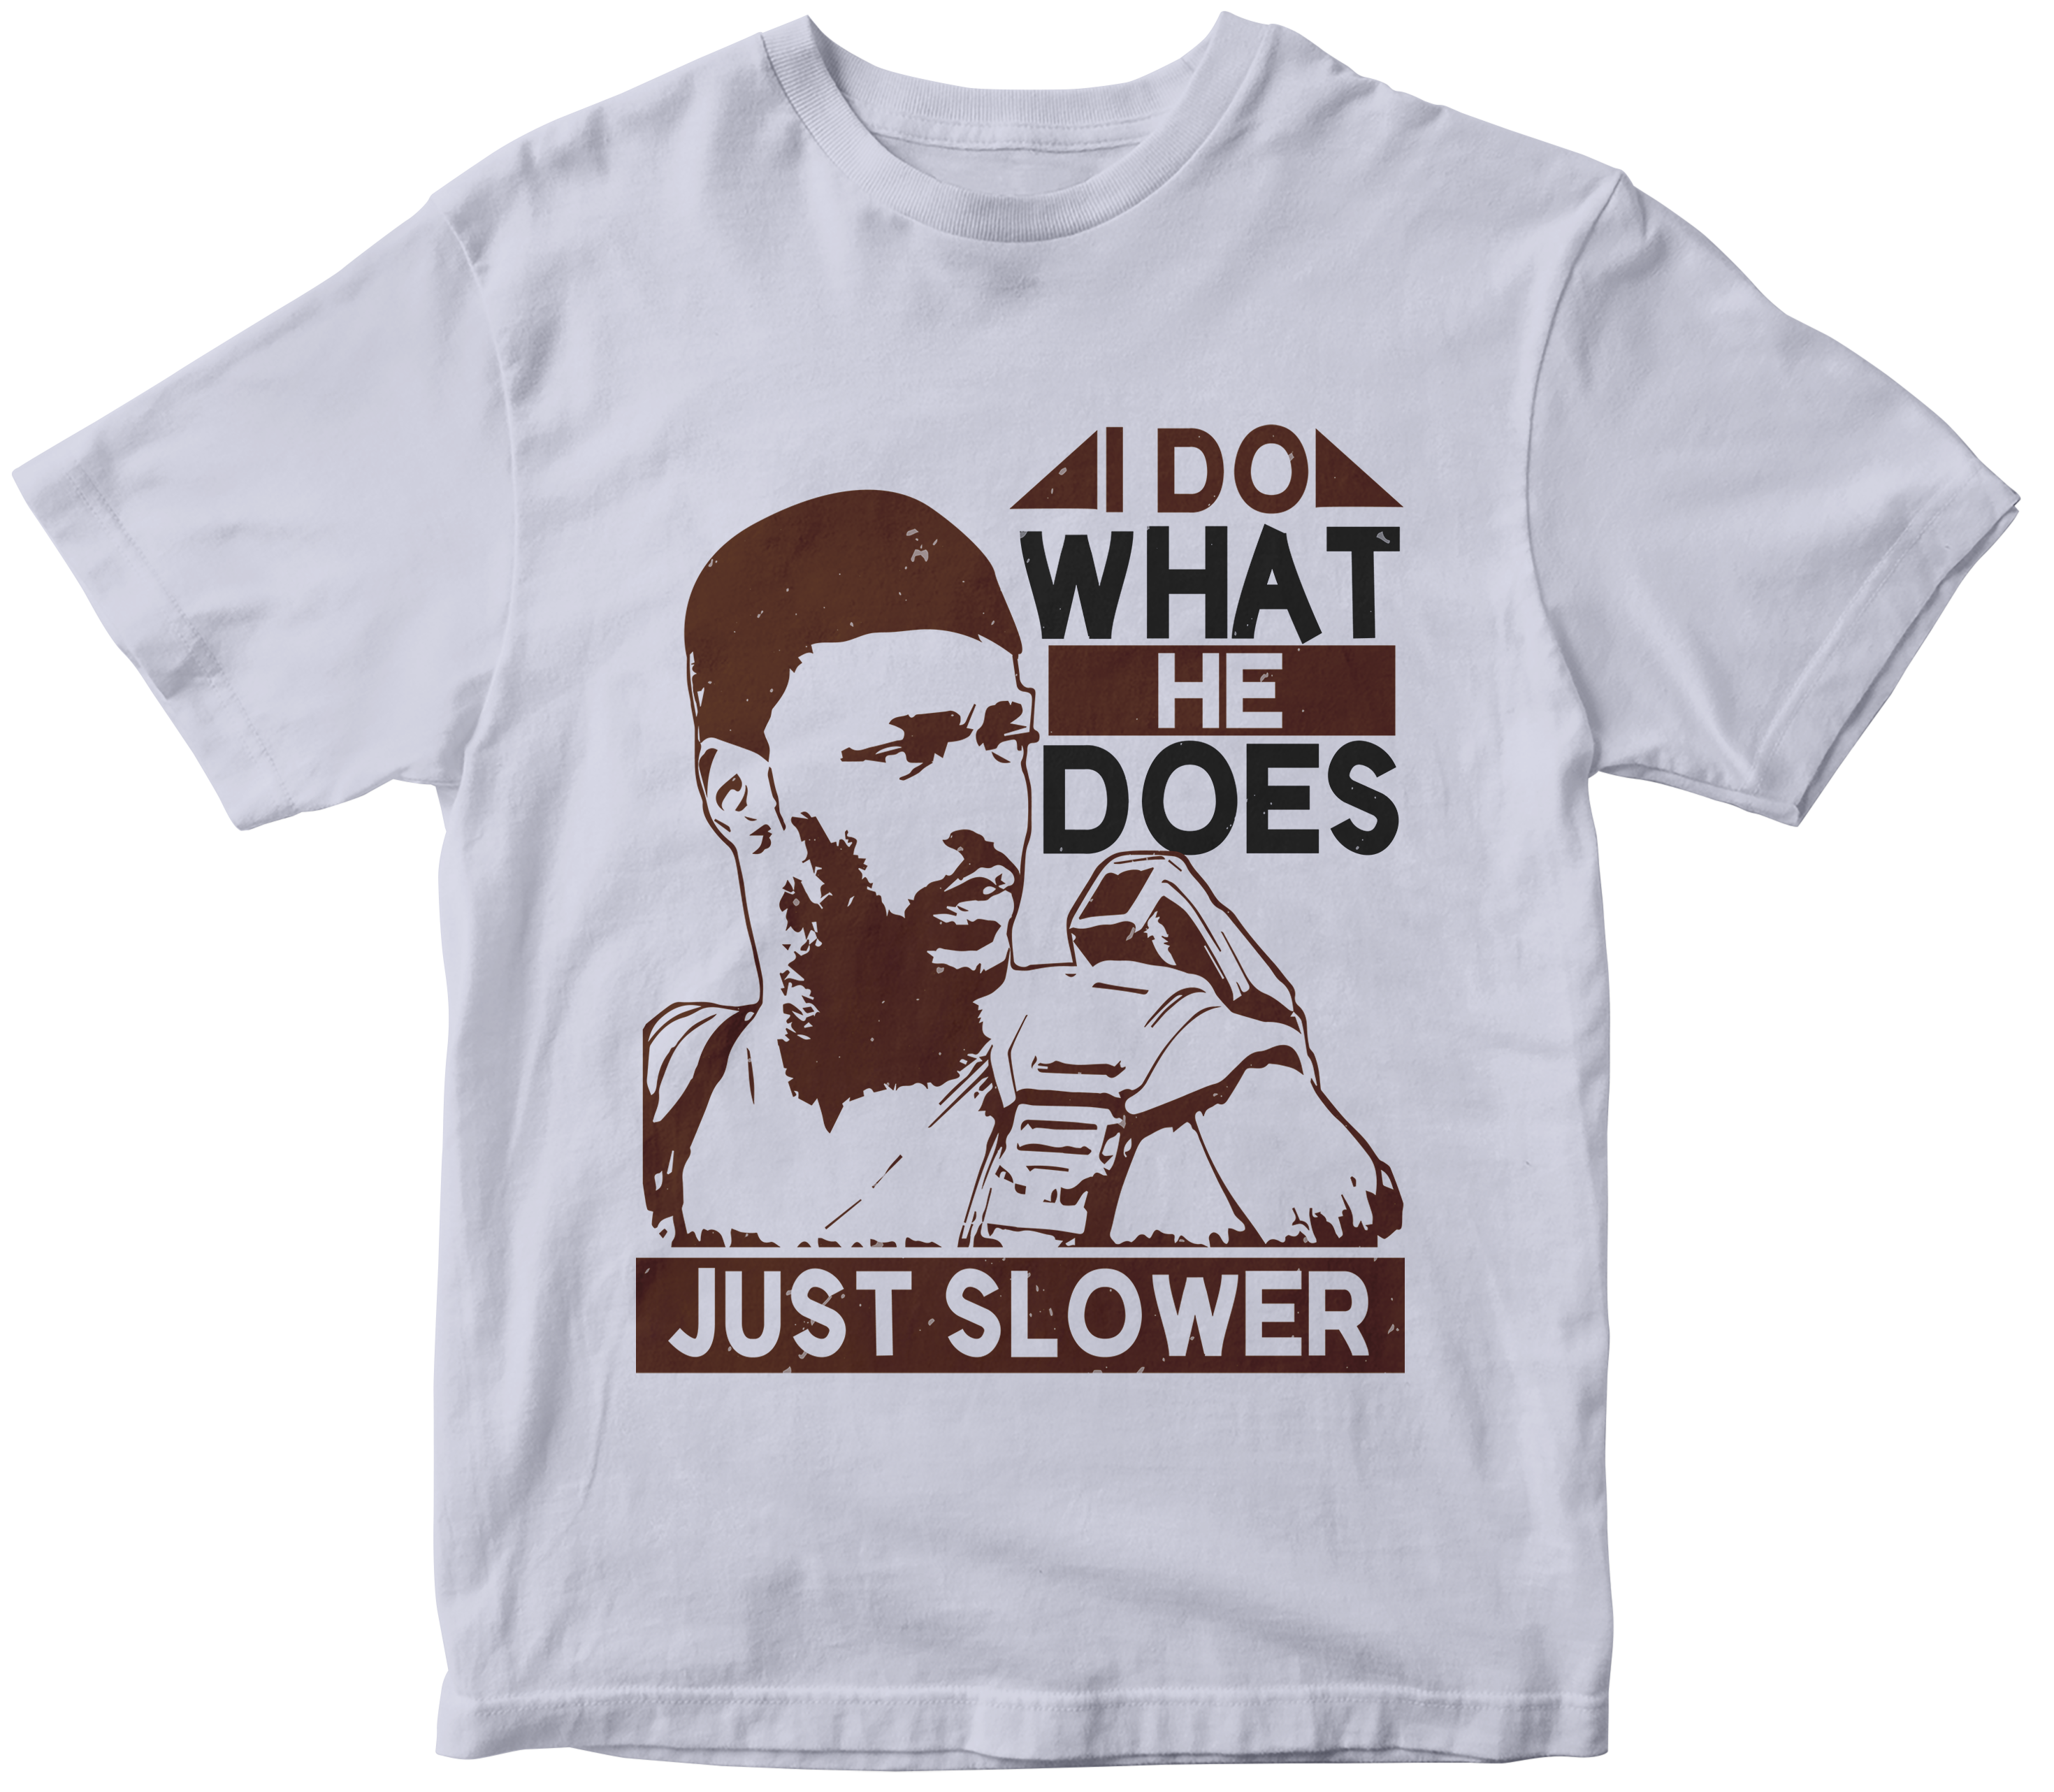 FALCON - I do what he does, just slower T-Shirt